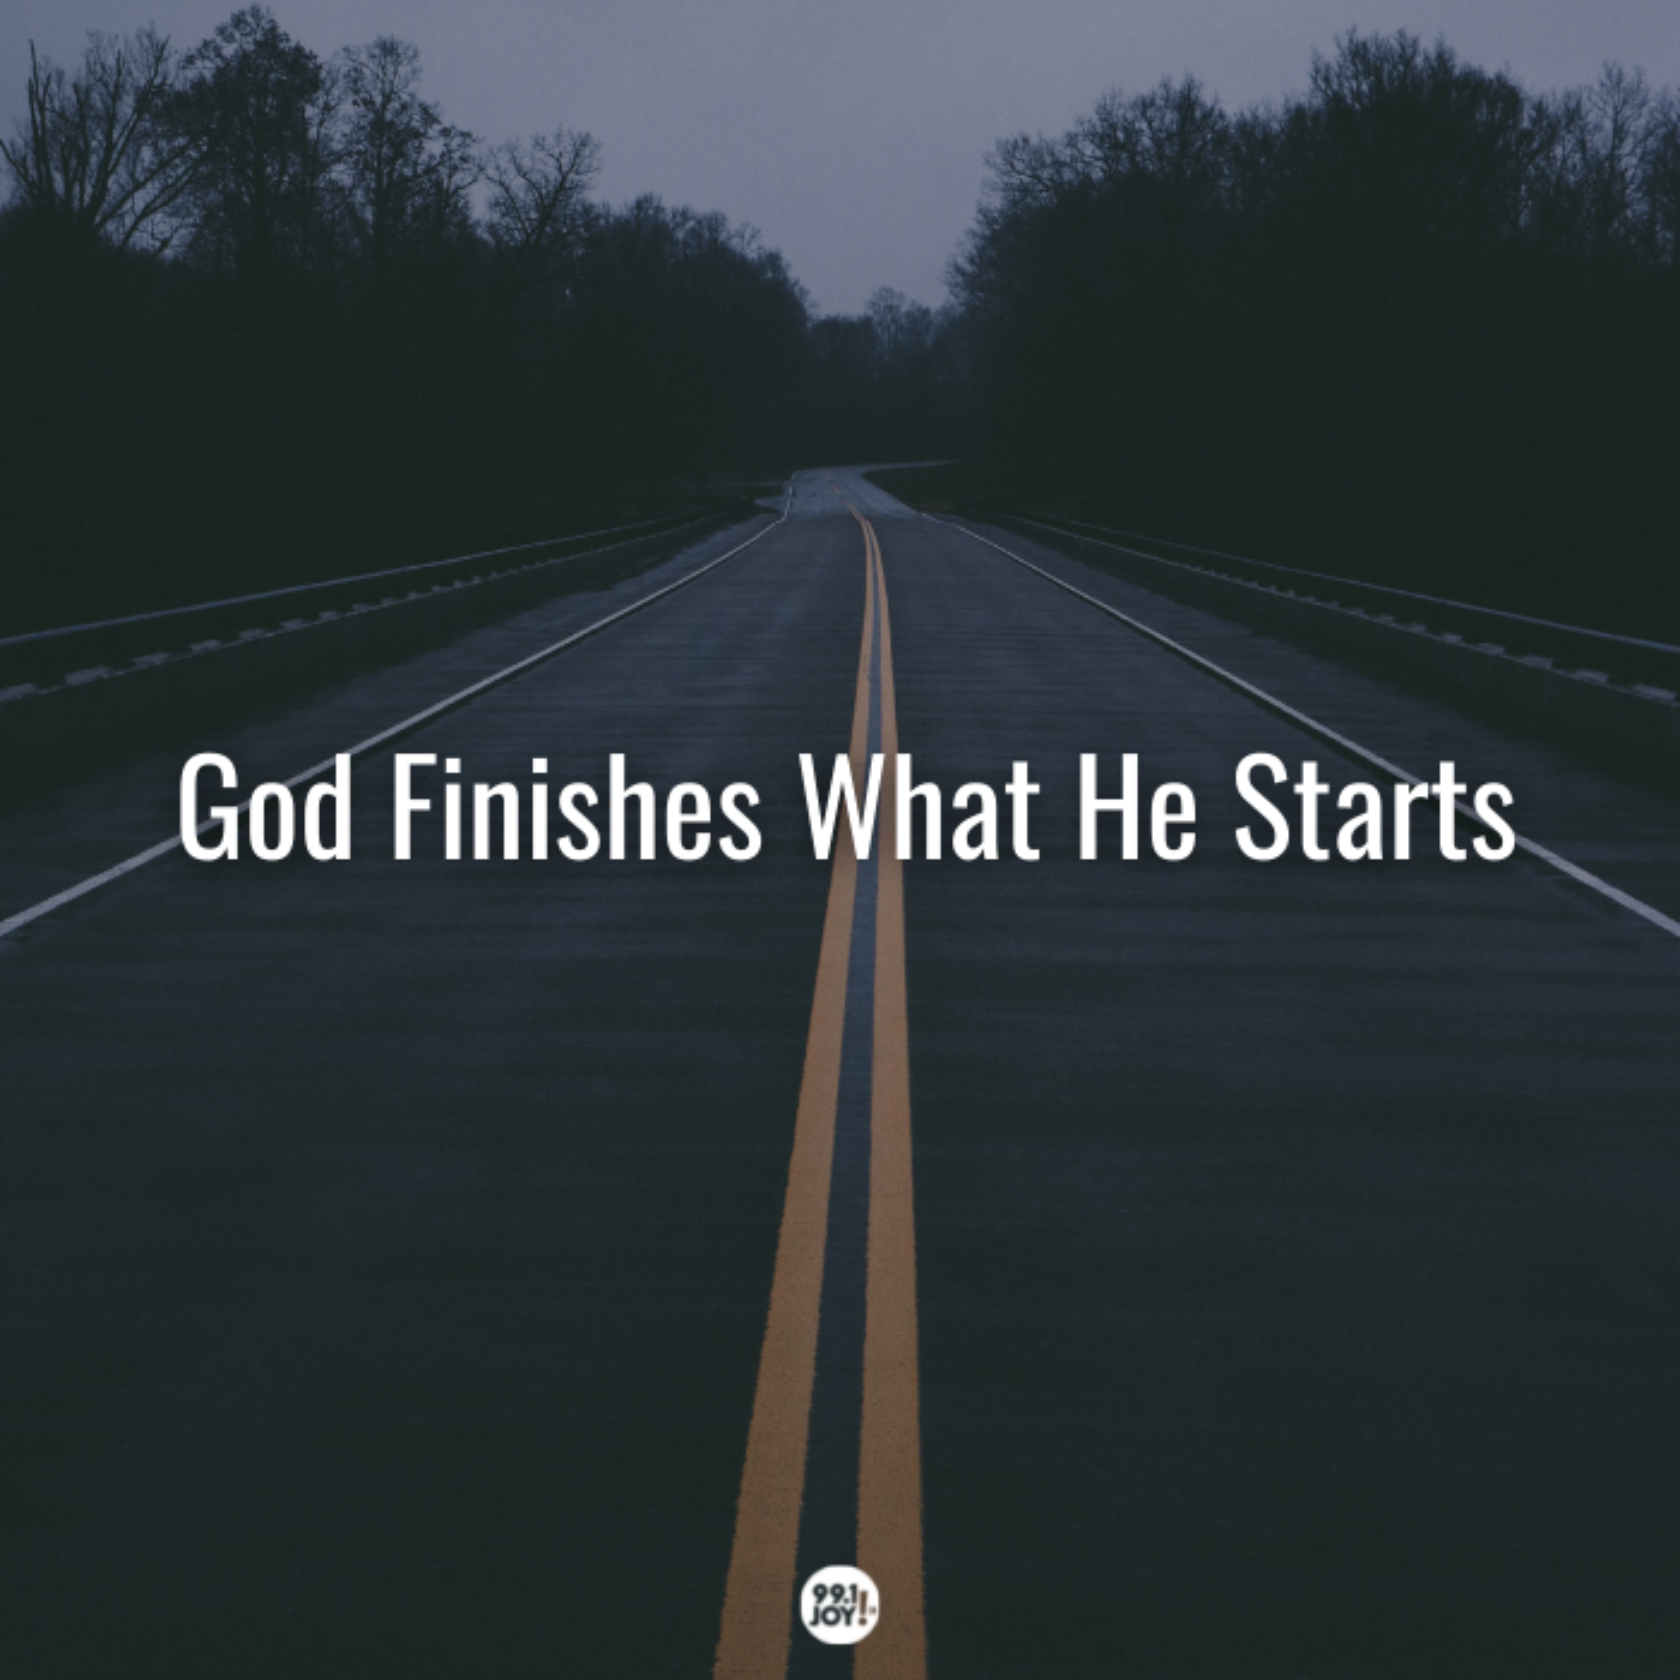 God Finishes What He Starts